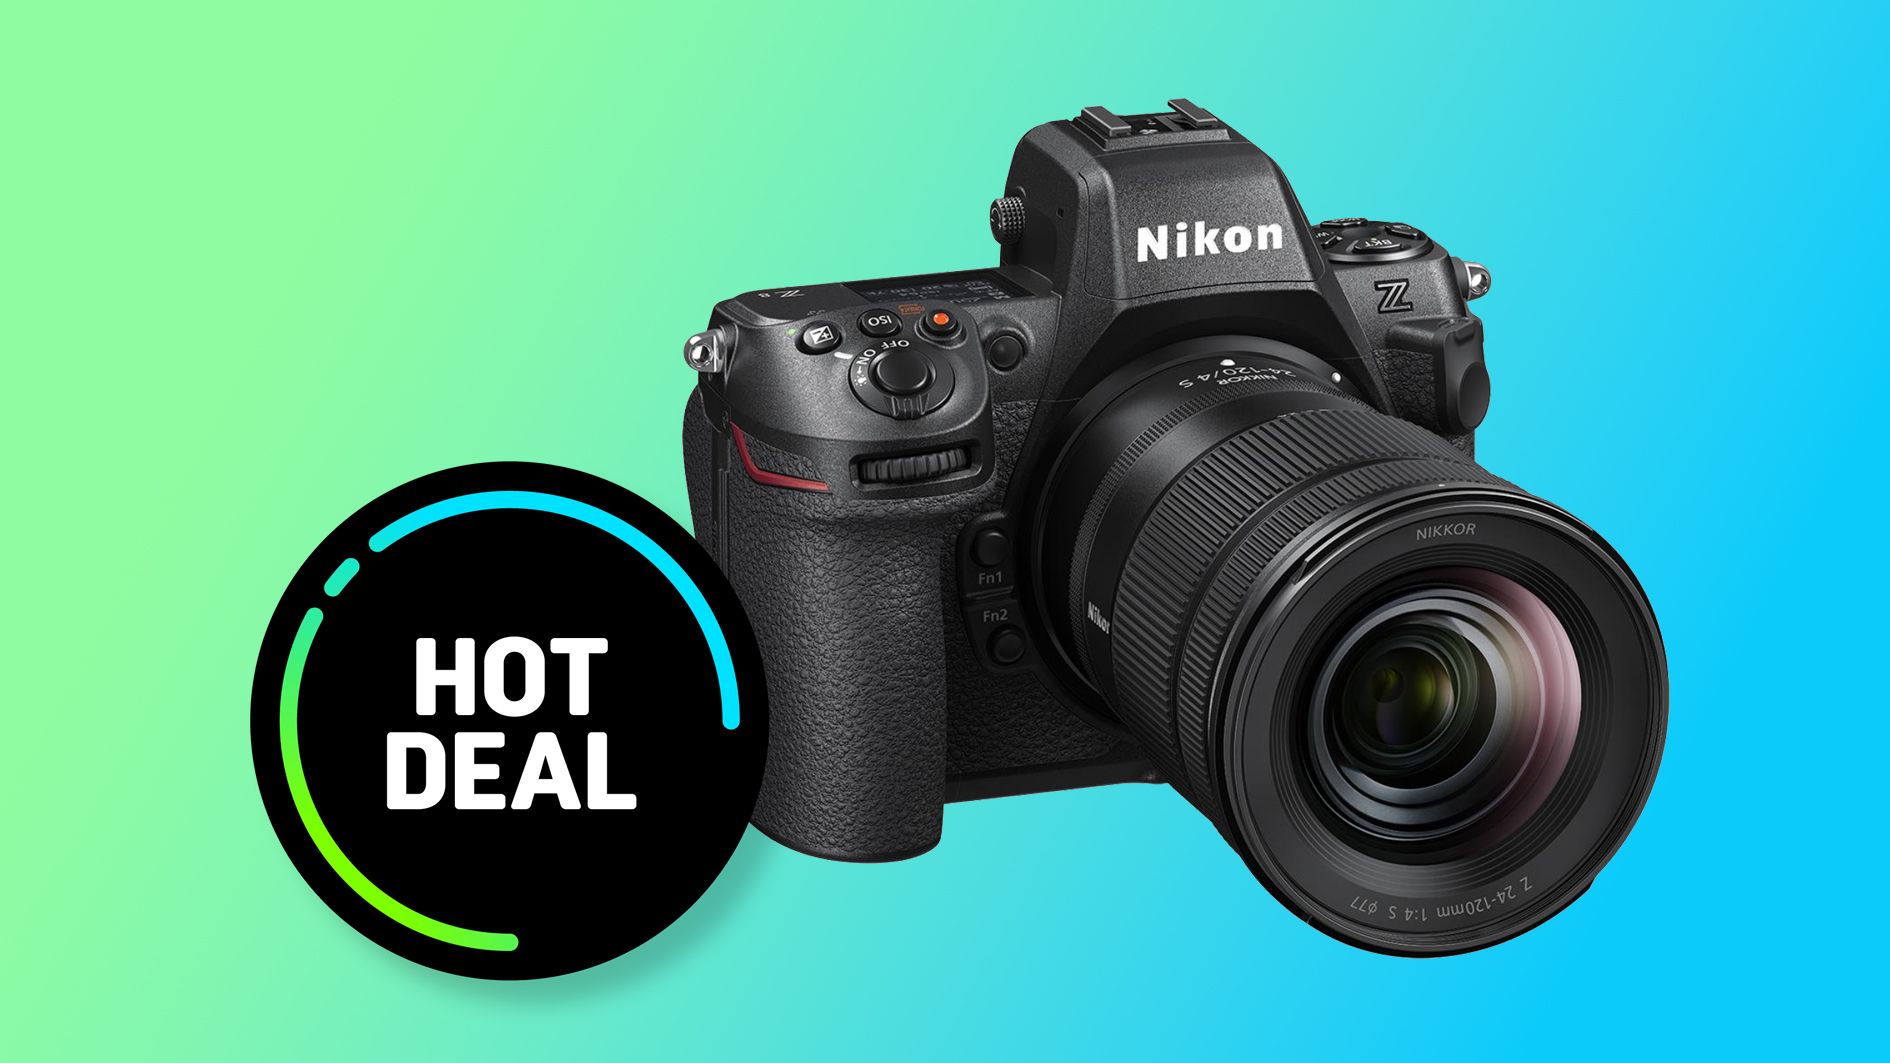 300 off the Nikon Z8 with 24120mm lens for Cyber Monday Digital